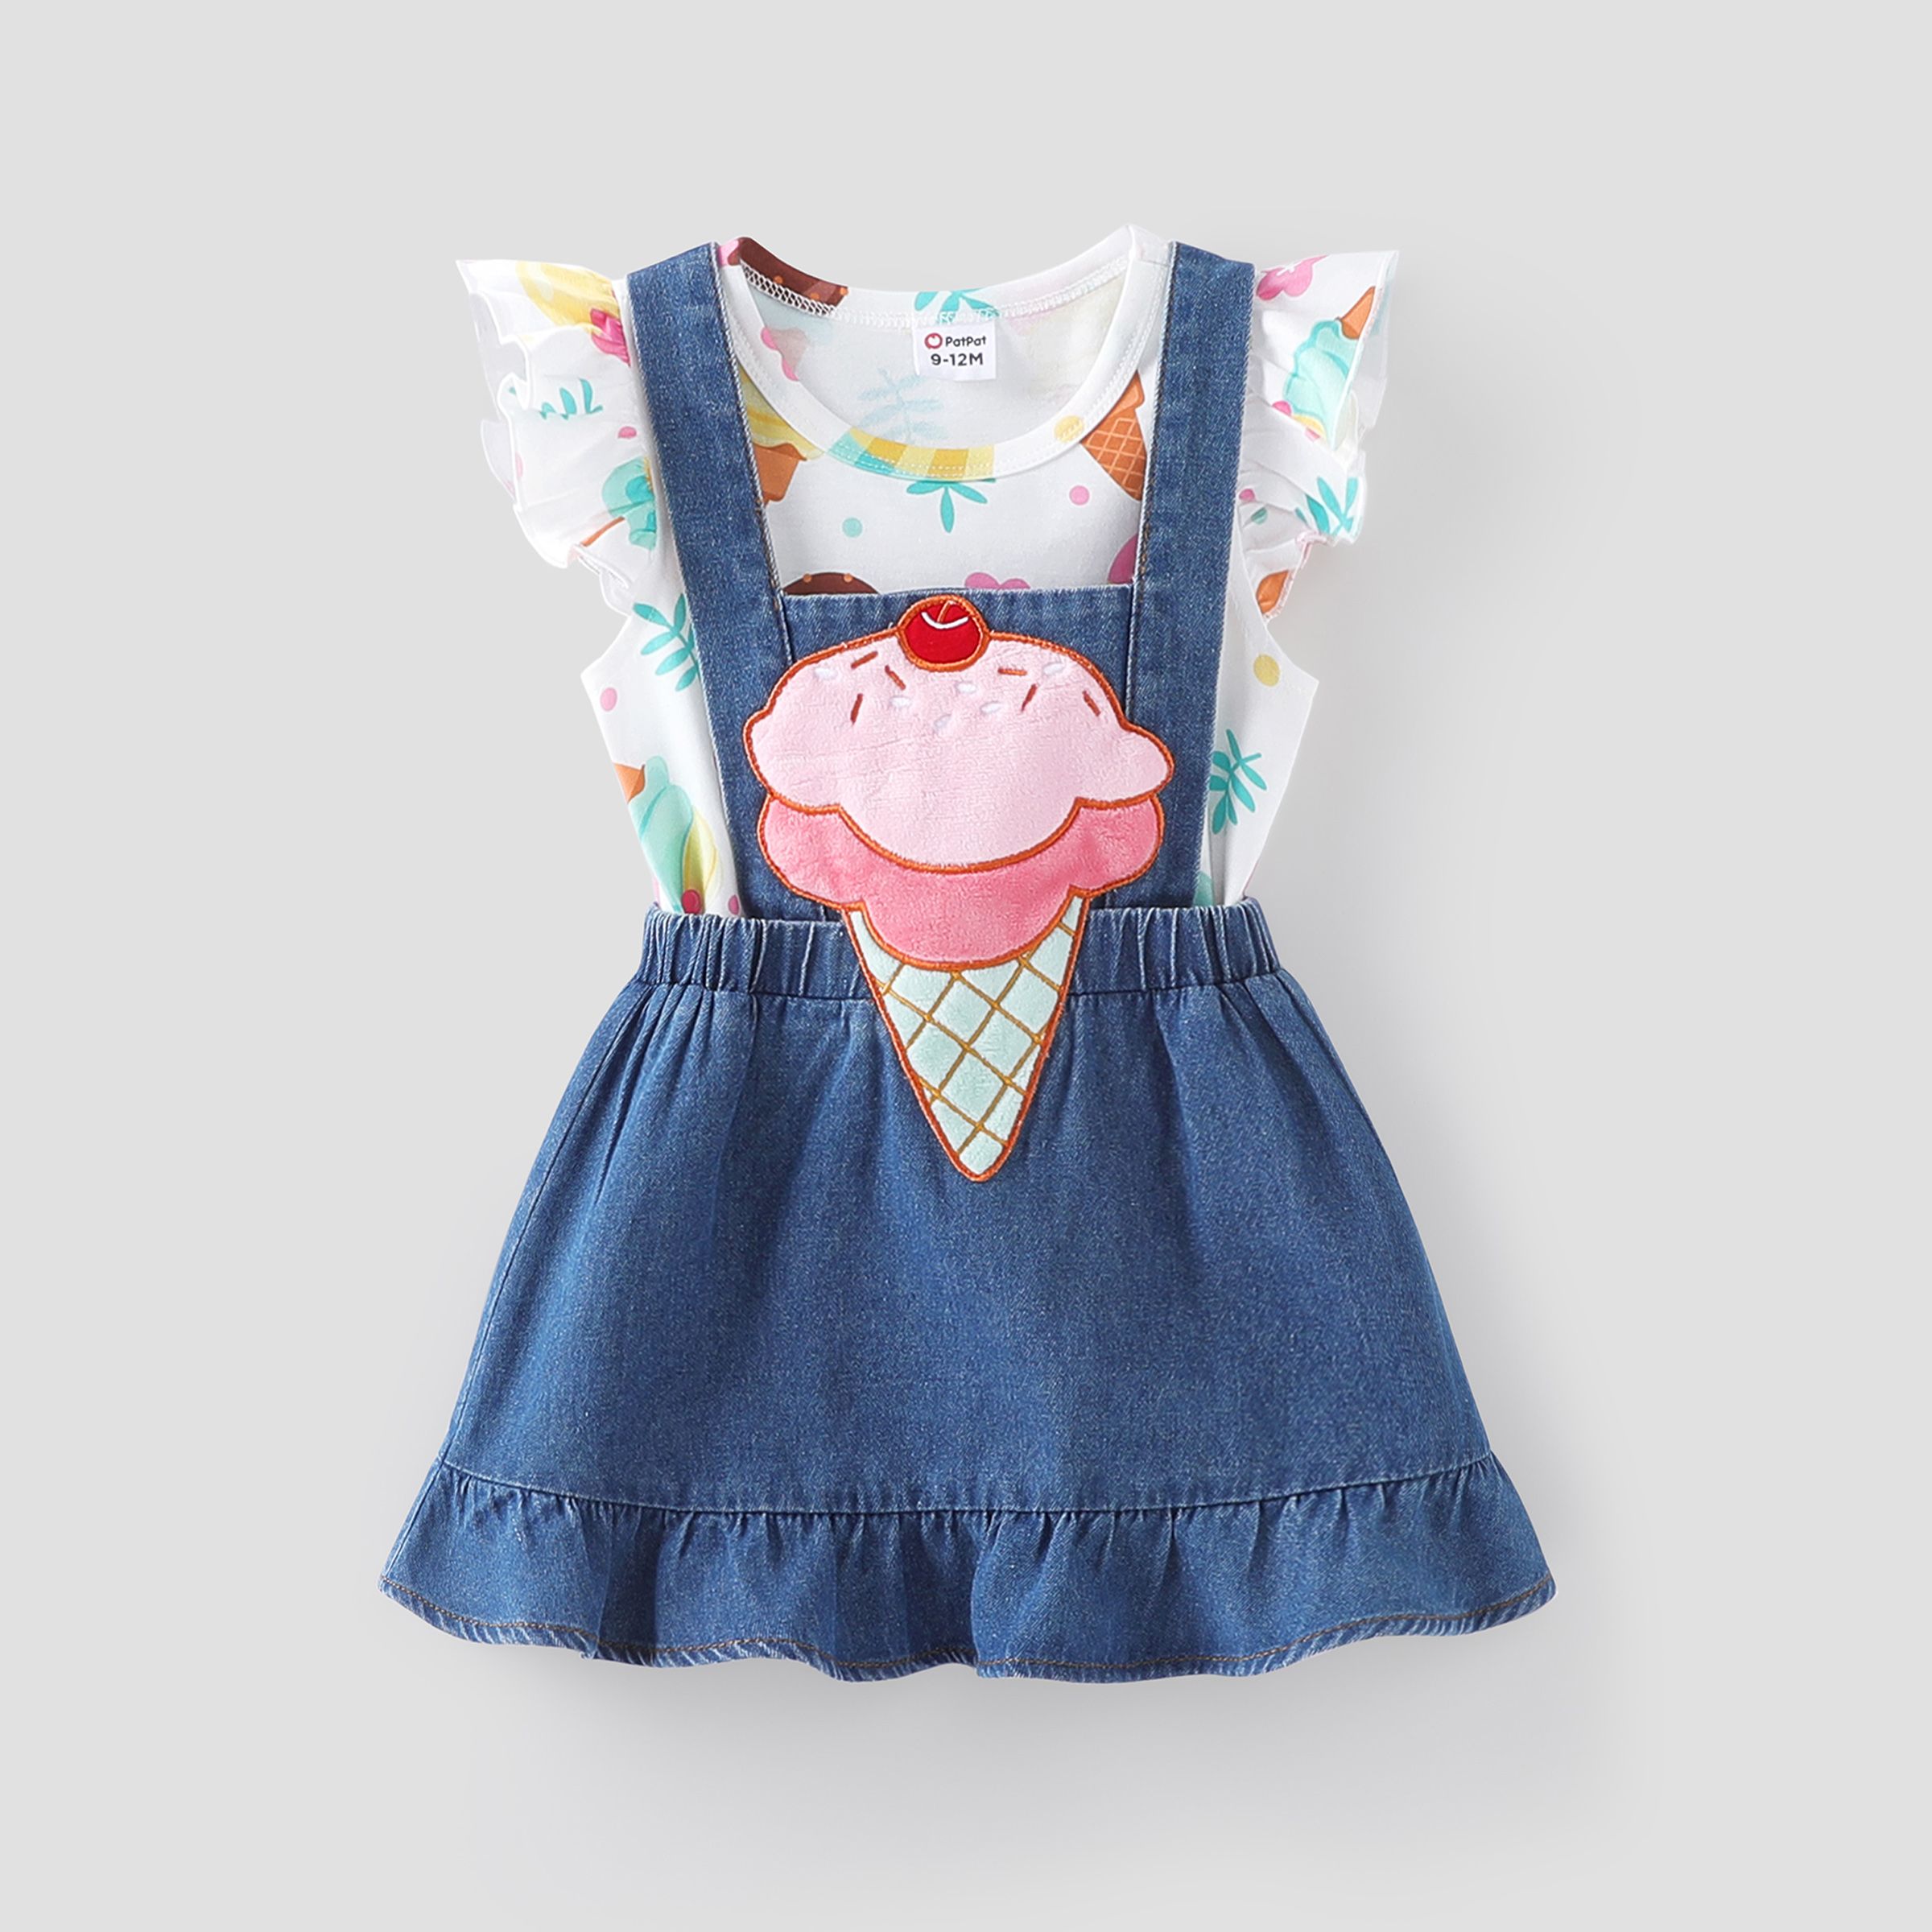 Baby/Toddler Girl 2pcs Ice Cream Print Tee and Embroidery Overall Dress Set